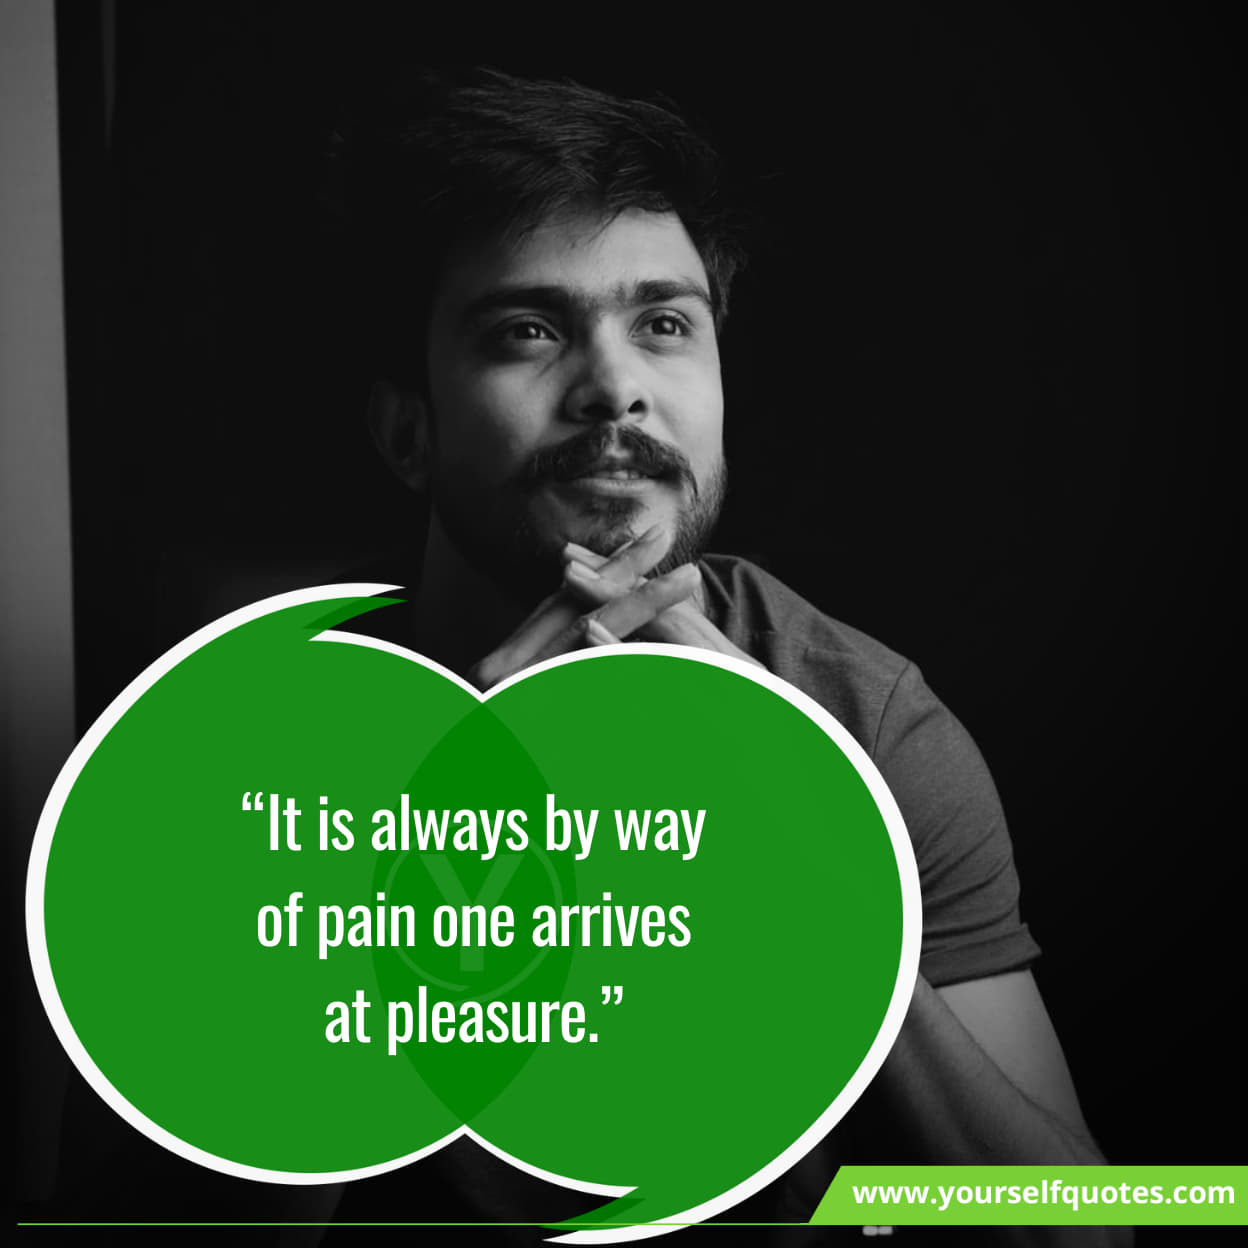 Best Famous Quotes On Pain 